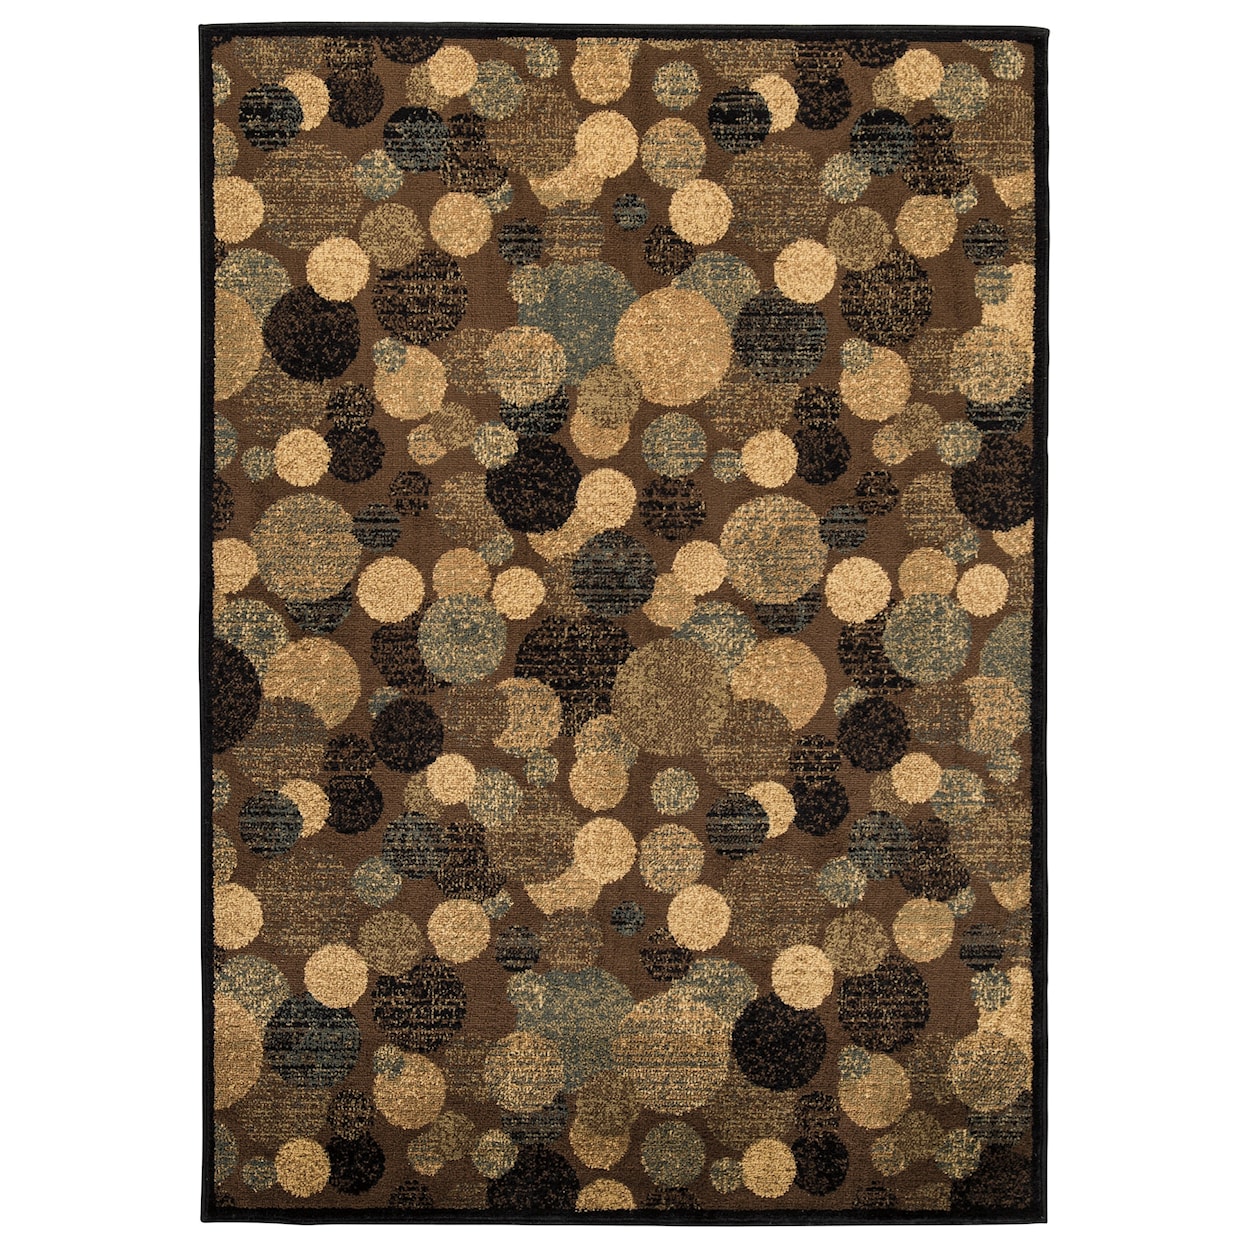 Ashley Furniture Signature Design Contemporary Area Rugs Vance Brown Large Rug